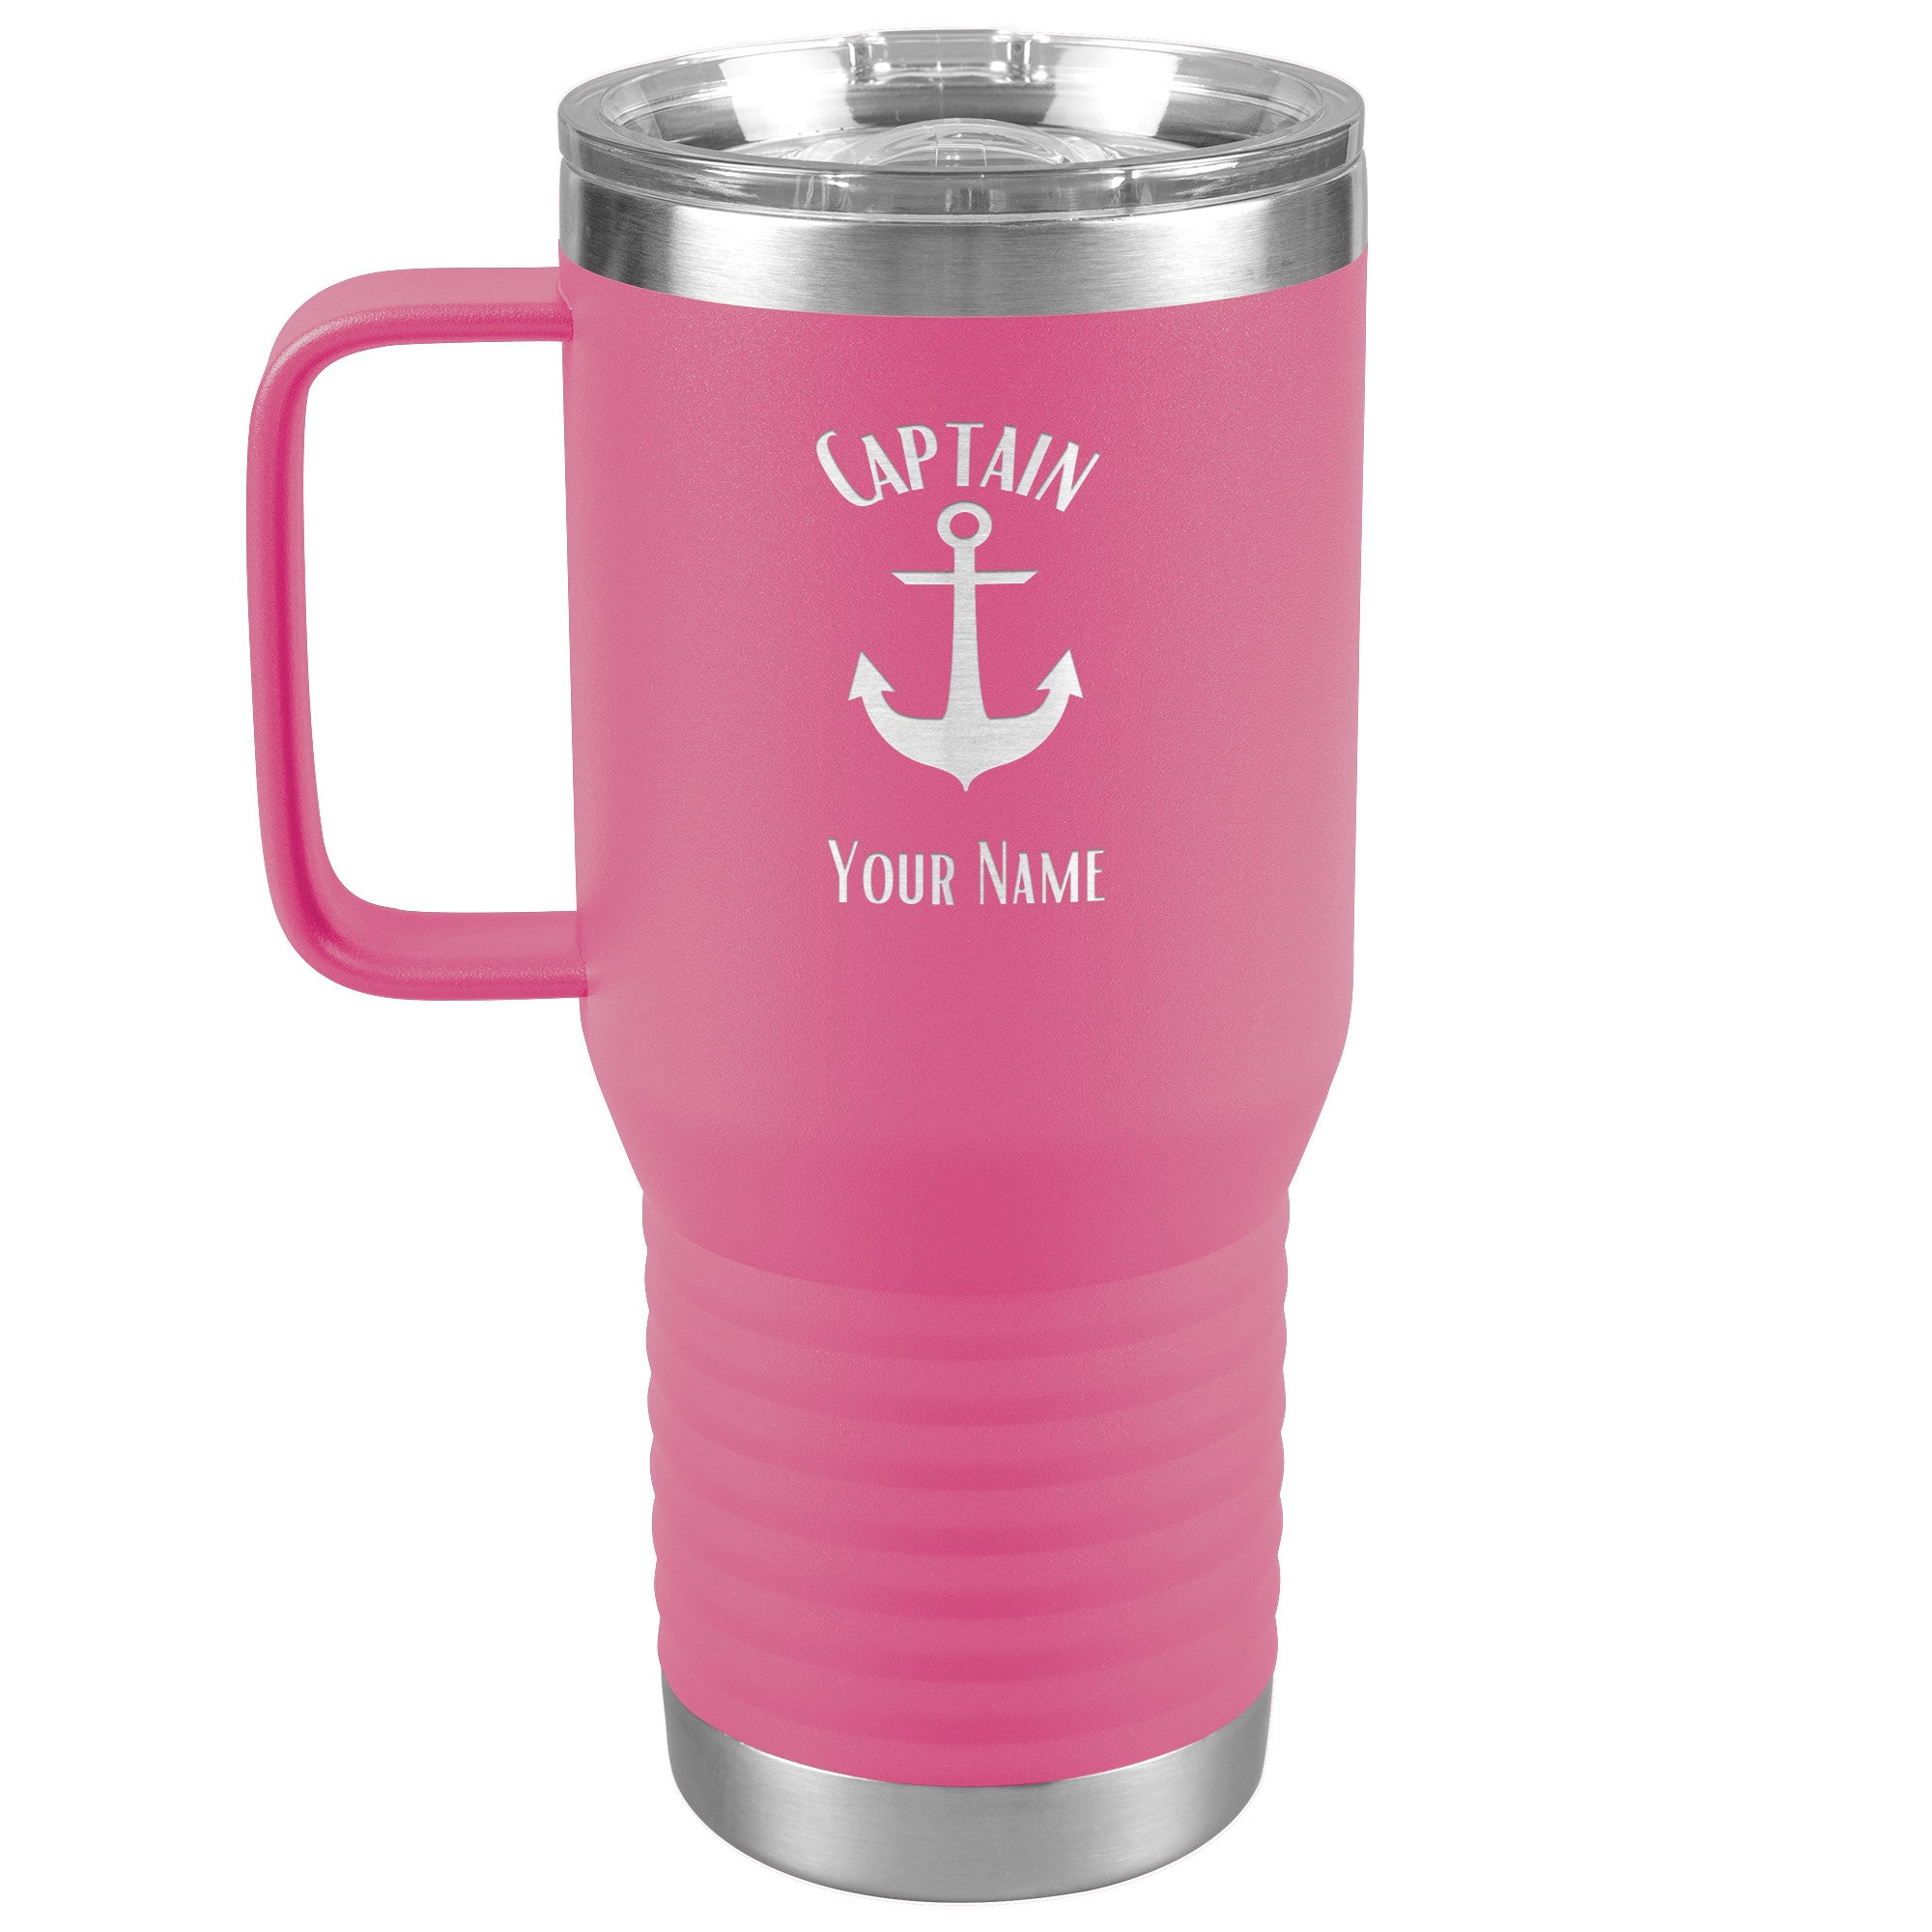 Boat Coffee Mugs Boat Gifts Boat Accessories Boat Owners 